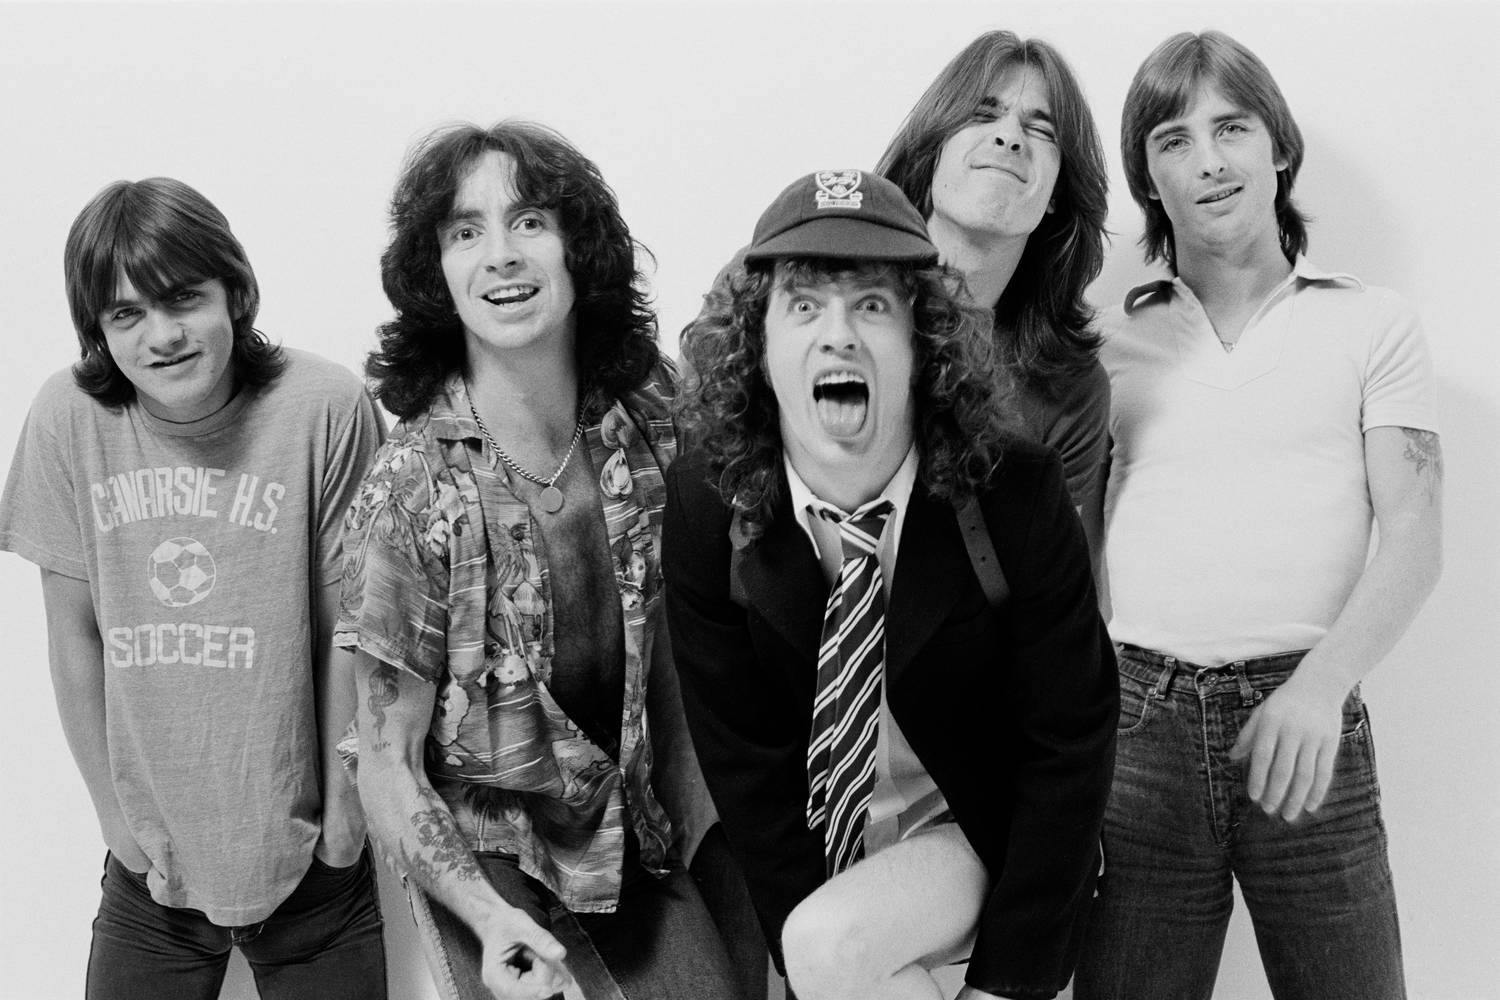 The 20 greatest AC/DC songs – ranked